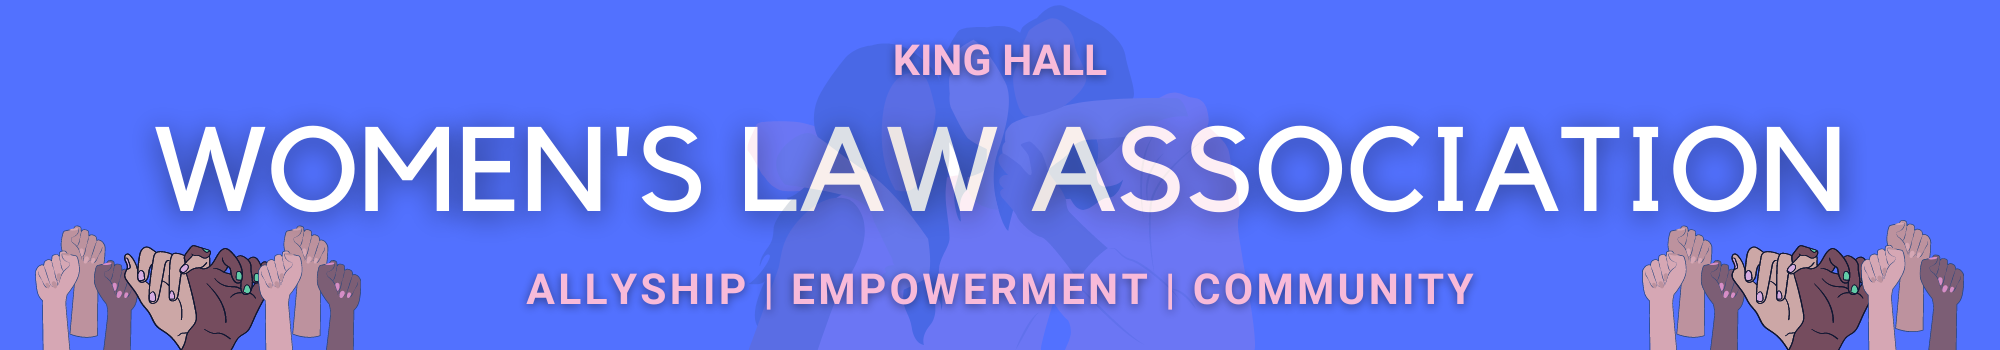 Women's Law Association with King Hall at UC Davis.